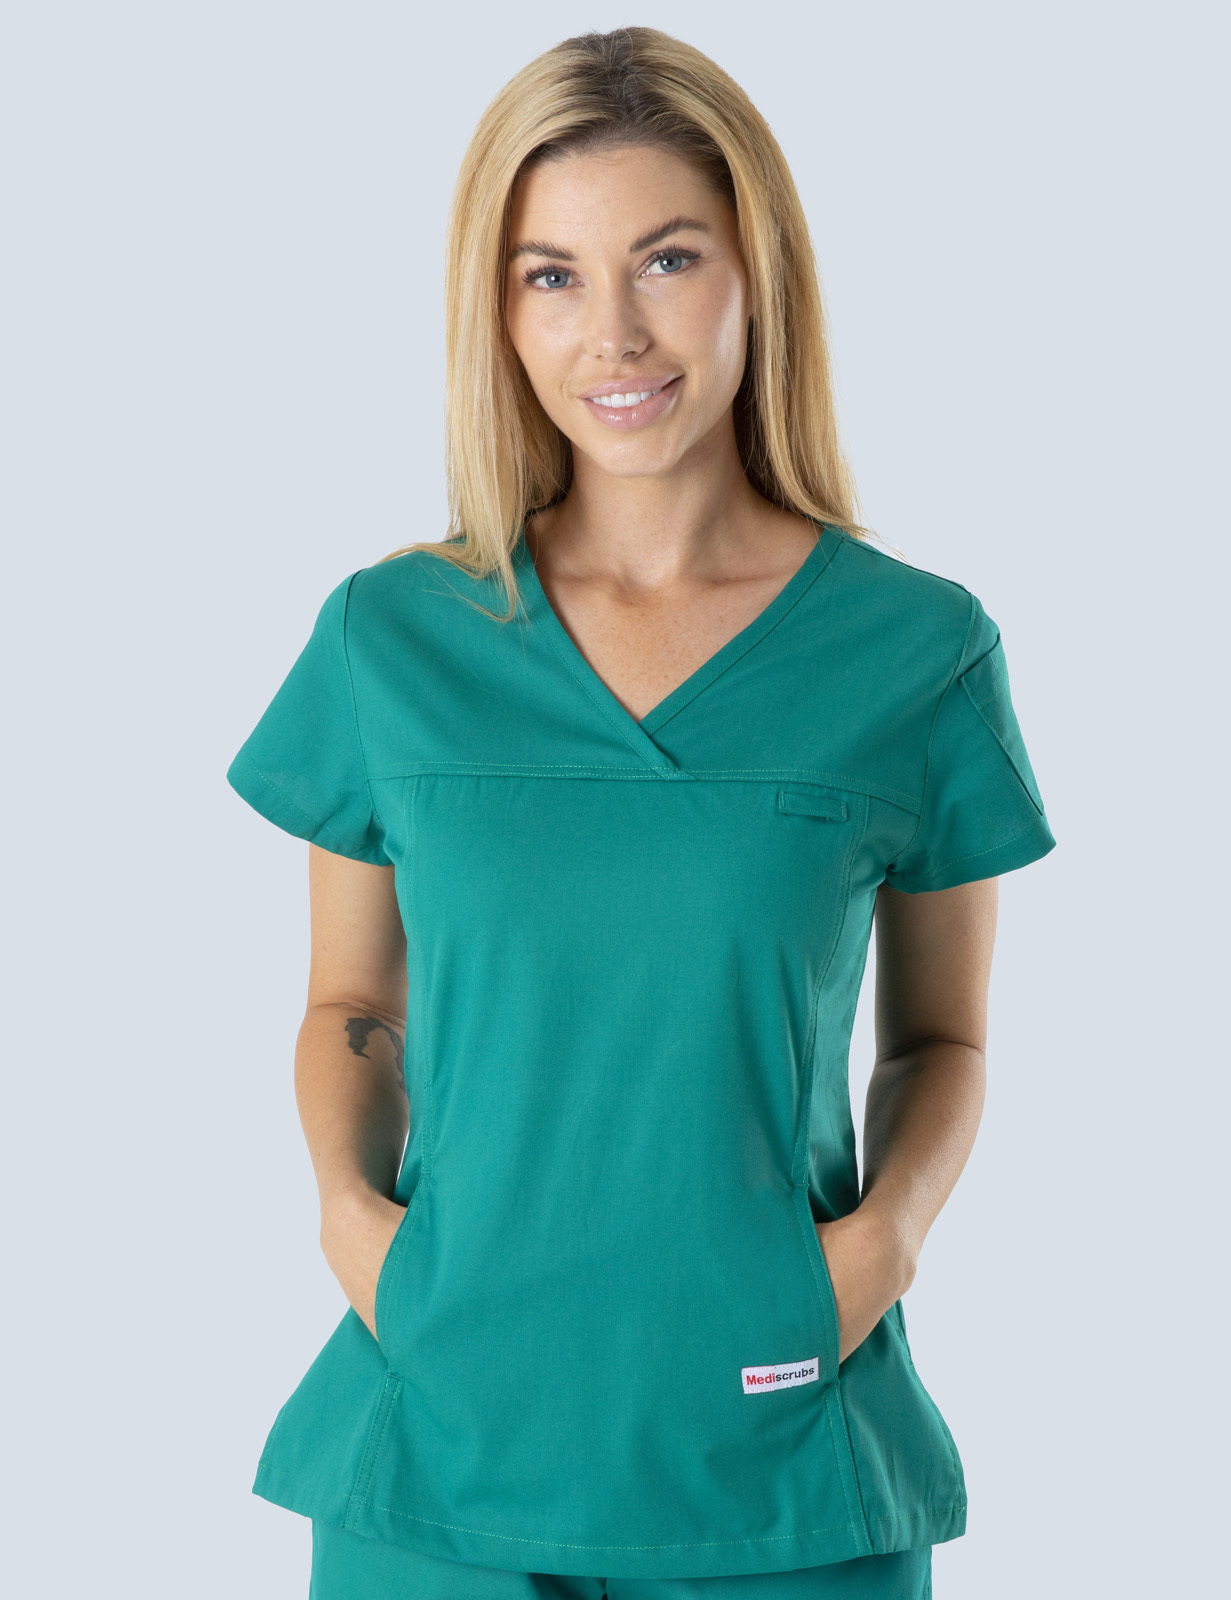 Mayfield Aged Care Activity Officers Uniform Top Bundle (Women's Fit Top Solid in Hunter incl Logos)